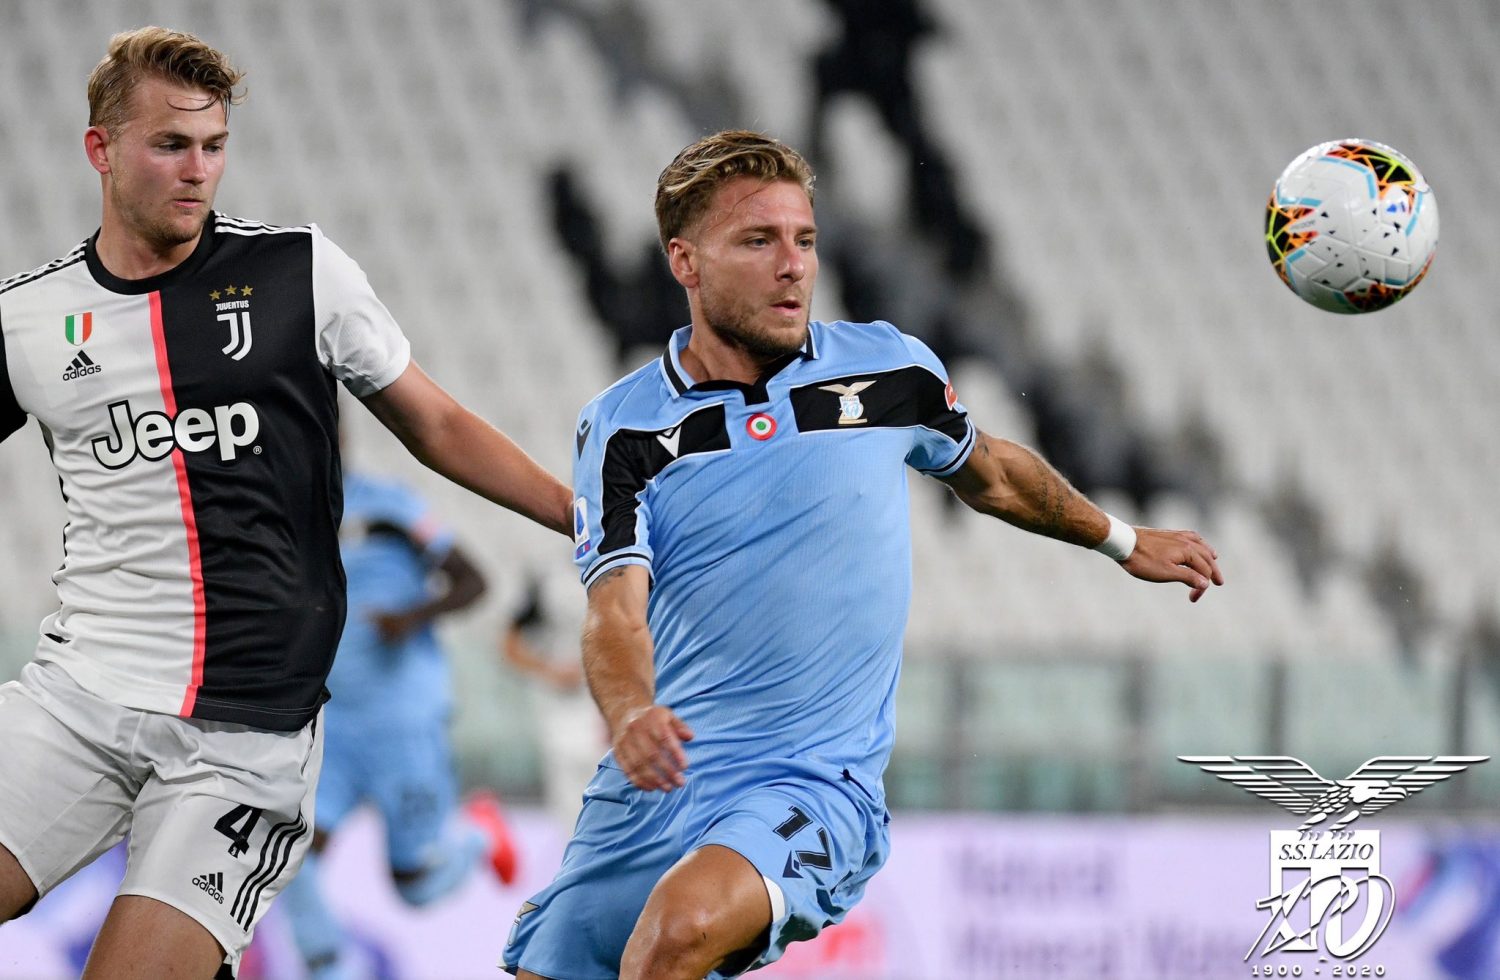 Can Lazio Pull off a Surprise Victory Over Juventus? | The Laziali